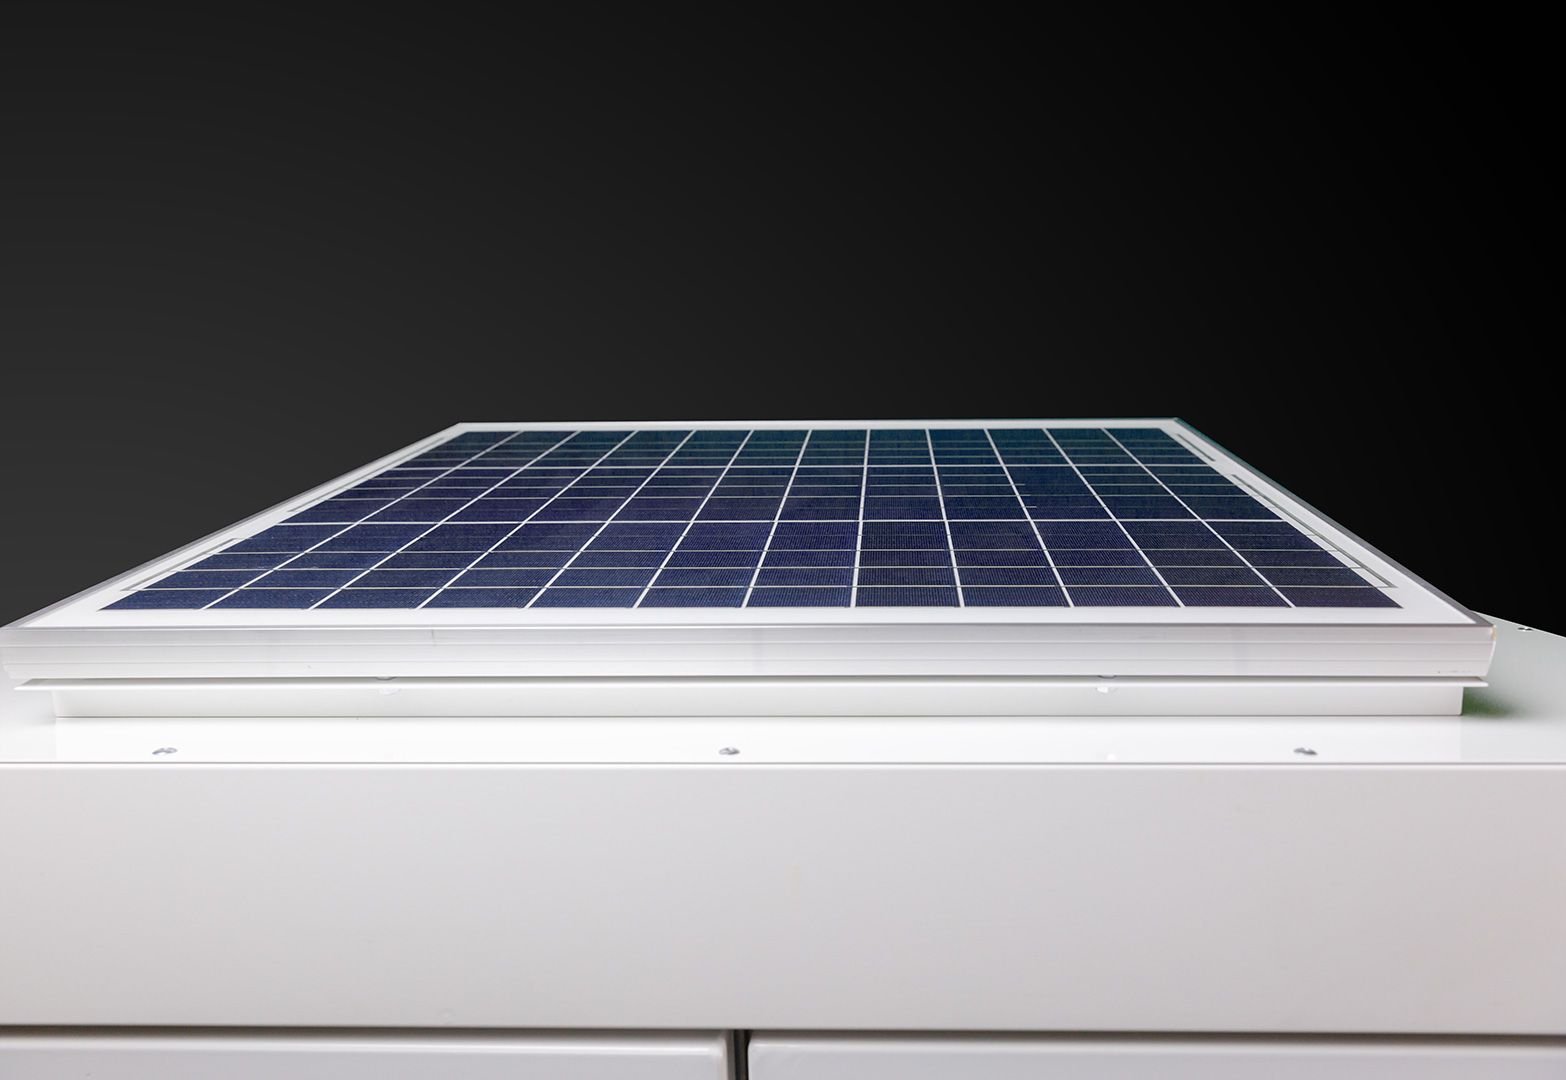 Close-up view of the solar panel on the top of a solar-powered smart locker